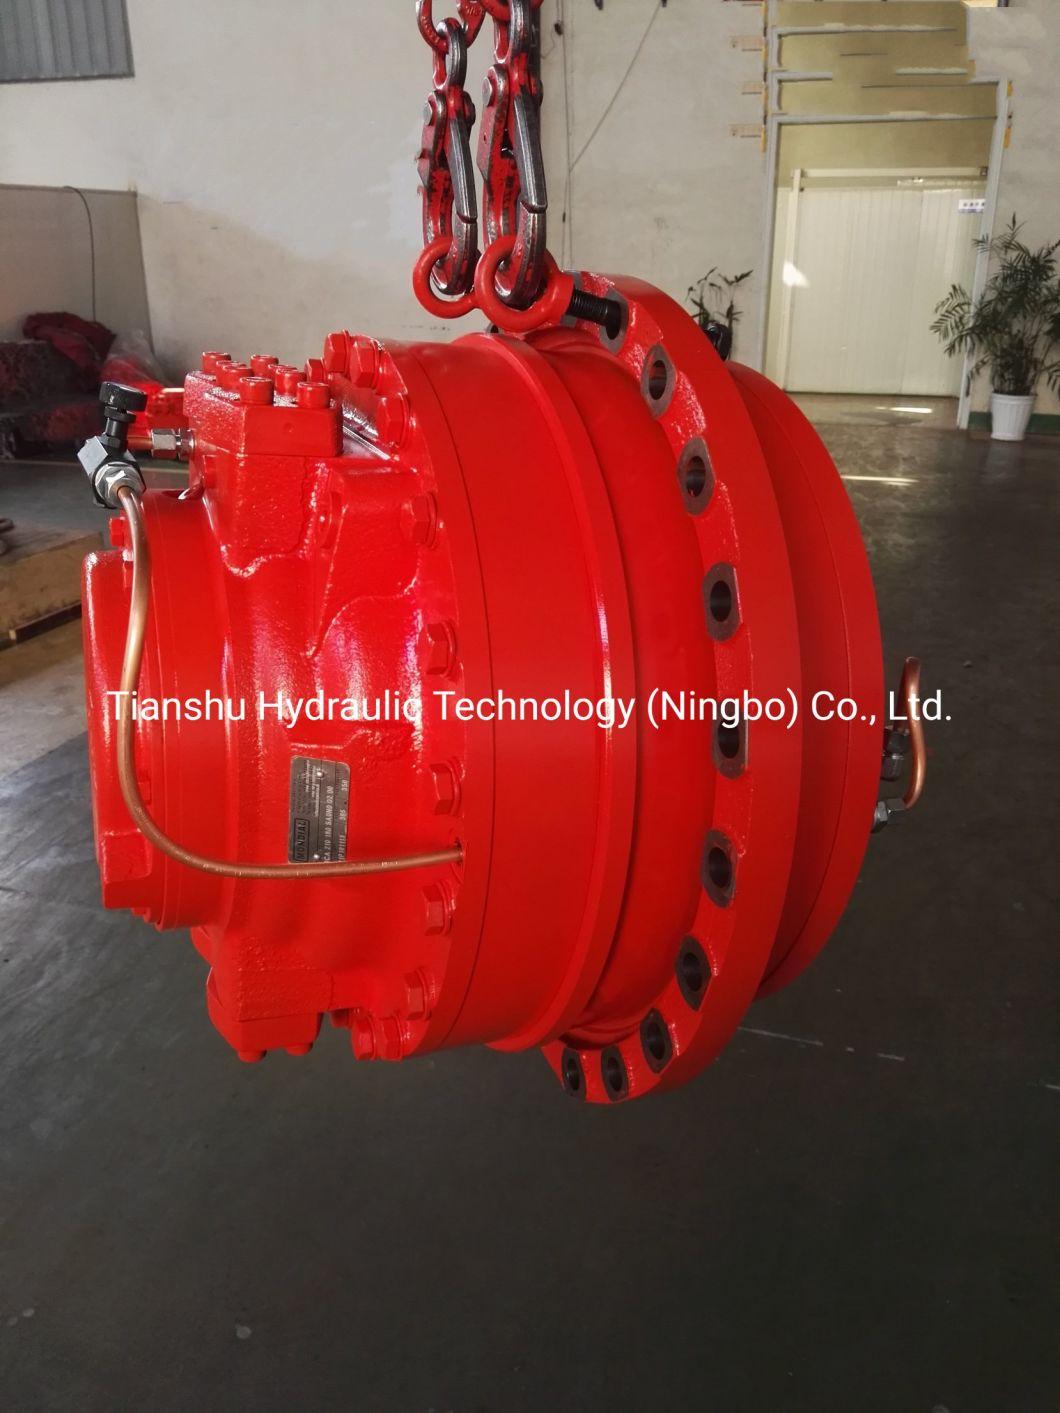 Good Price Hagglunds Ca70 60 Ca Series Low Speed High Torque Hydraulic Motor Drives